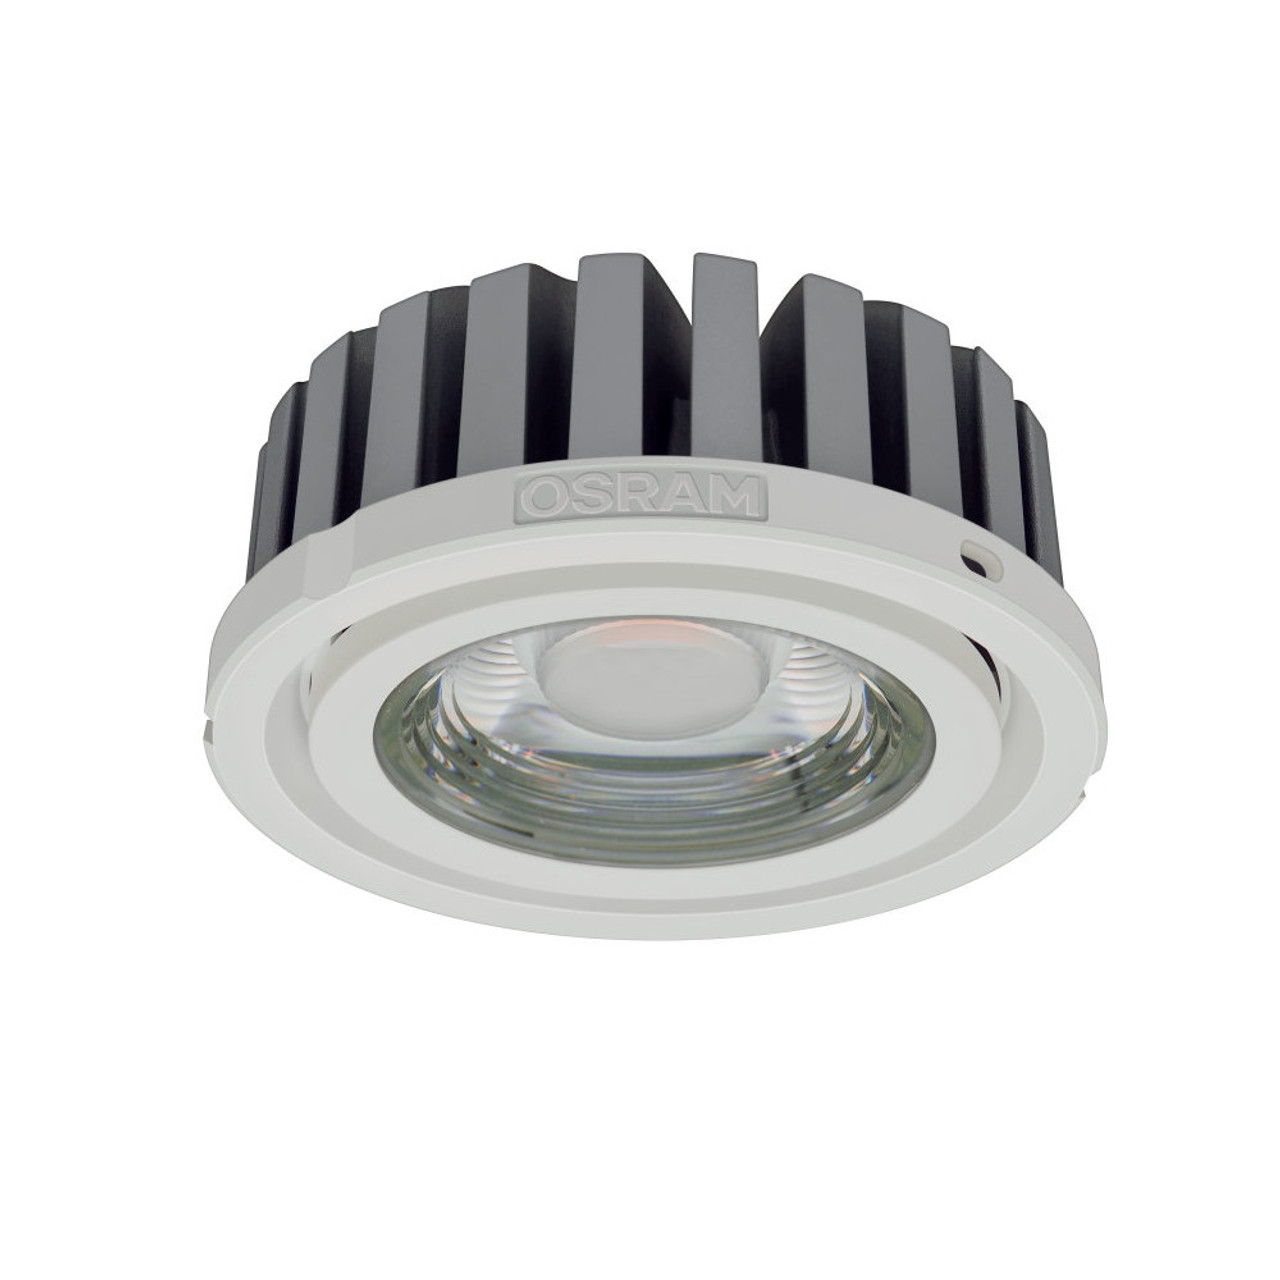 LED 1050mA Constant Current 36.8W Dimmable 940 4000K 3450lm 60 degrees COB